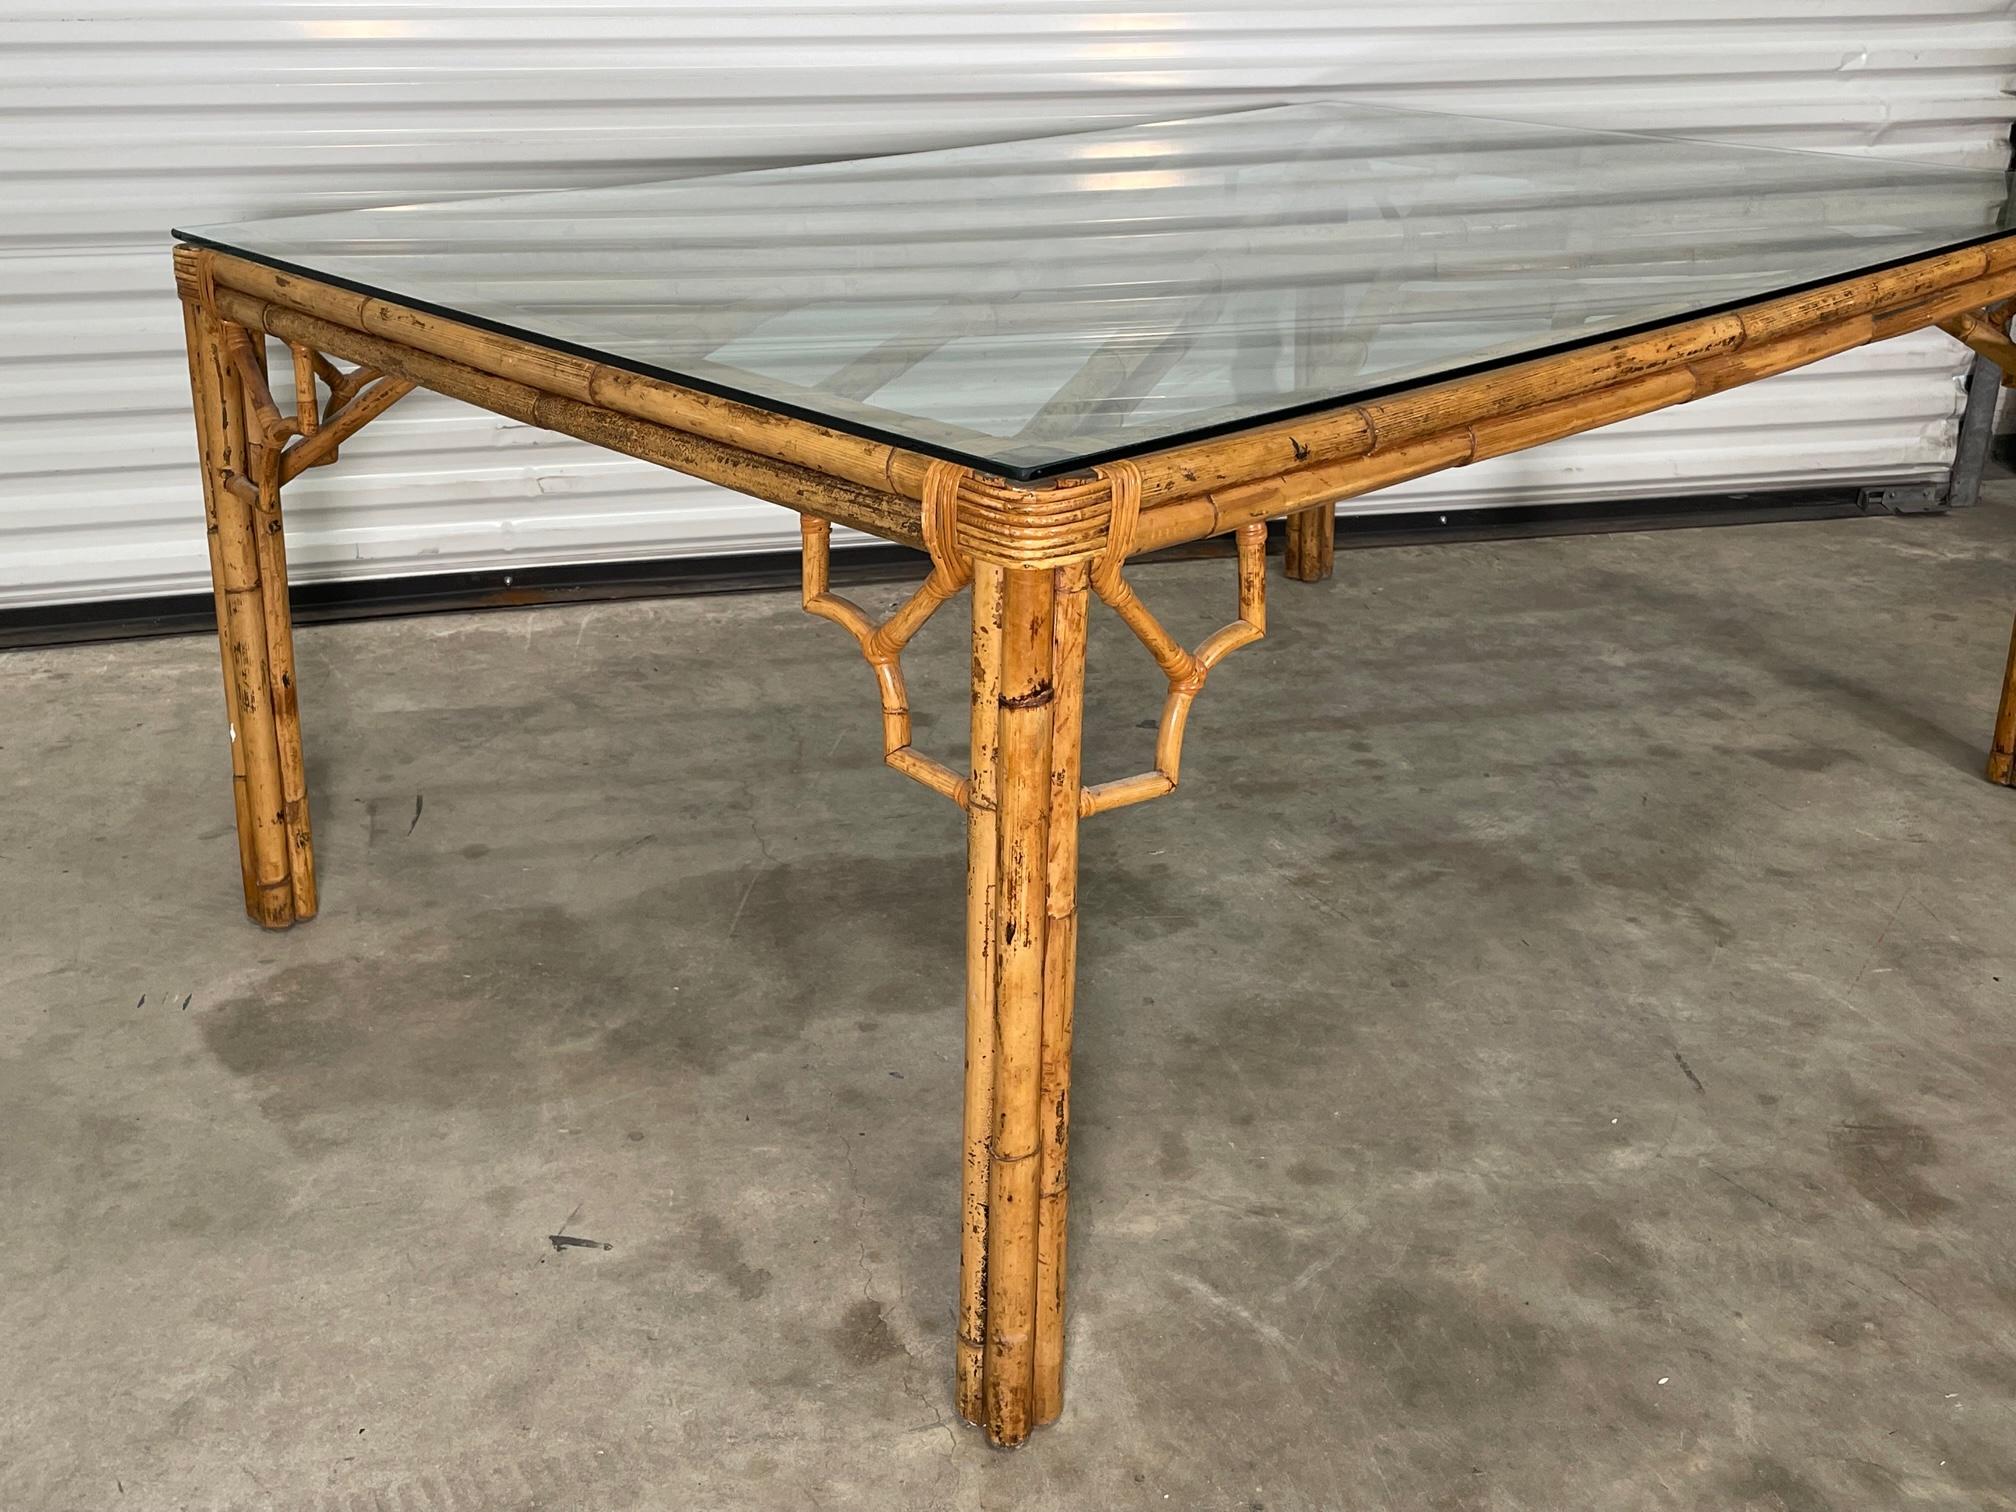 20th Century Rattan Chinese Chippendale Fretwork Dining Table For Sale